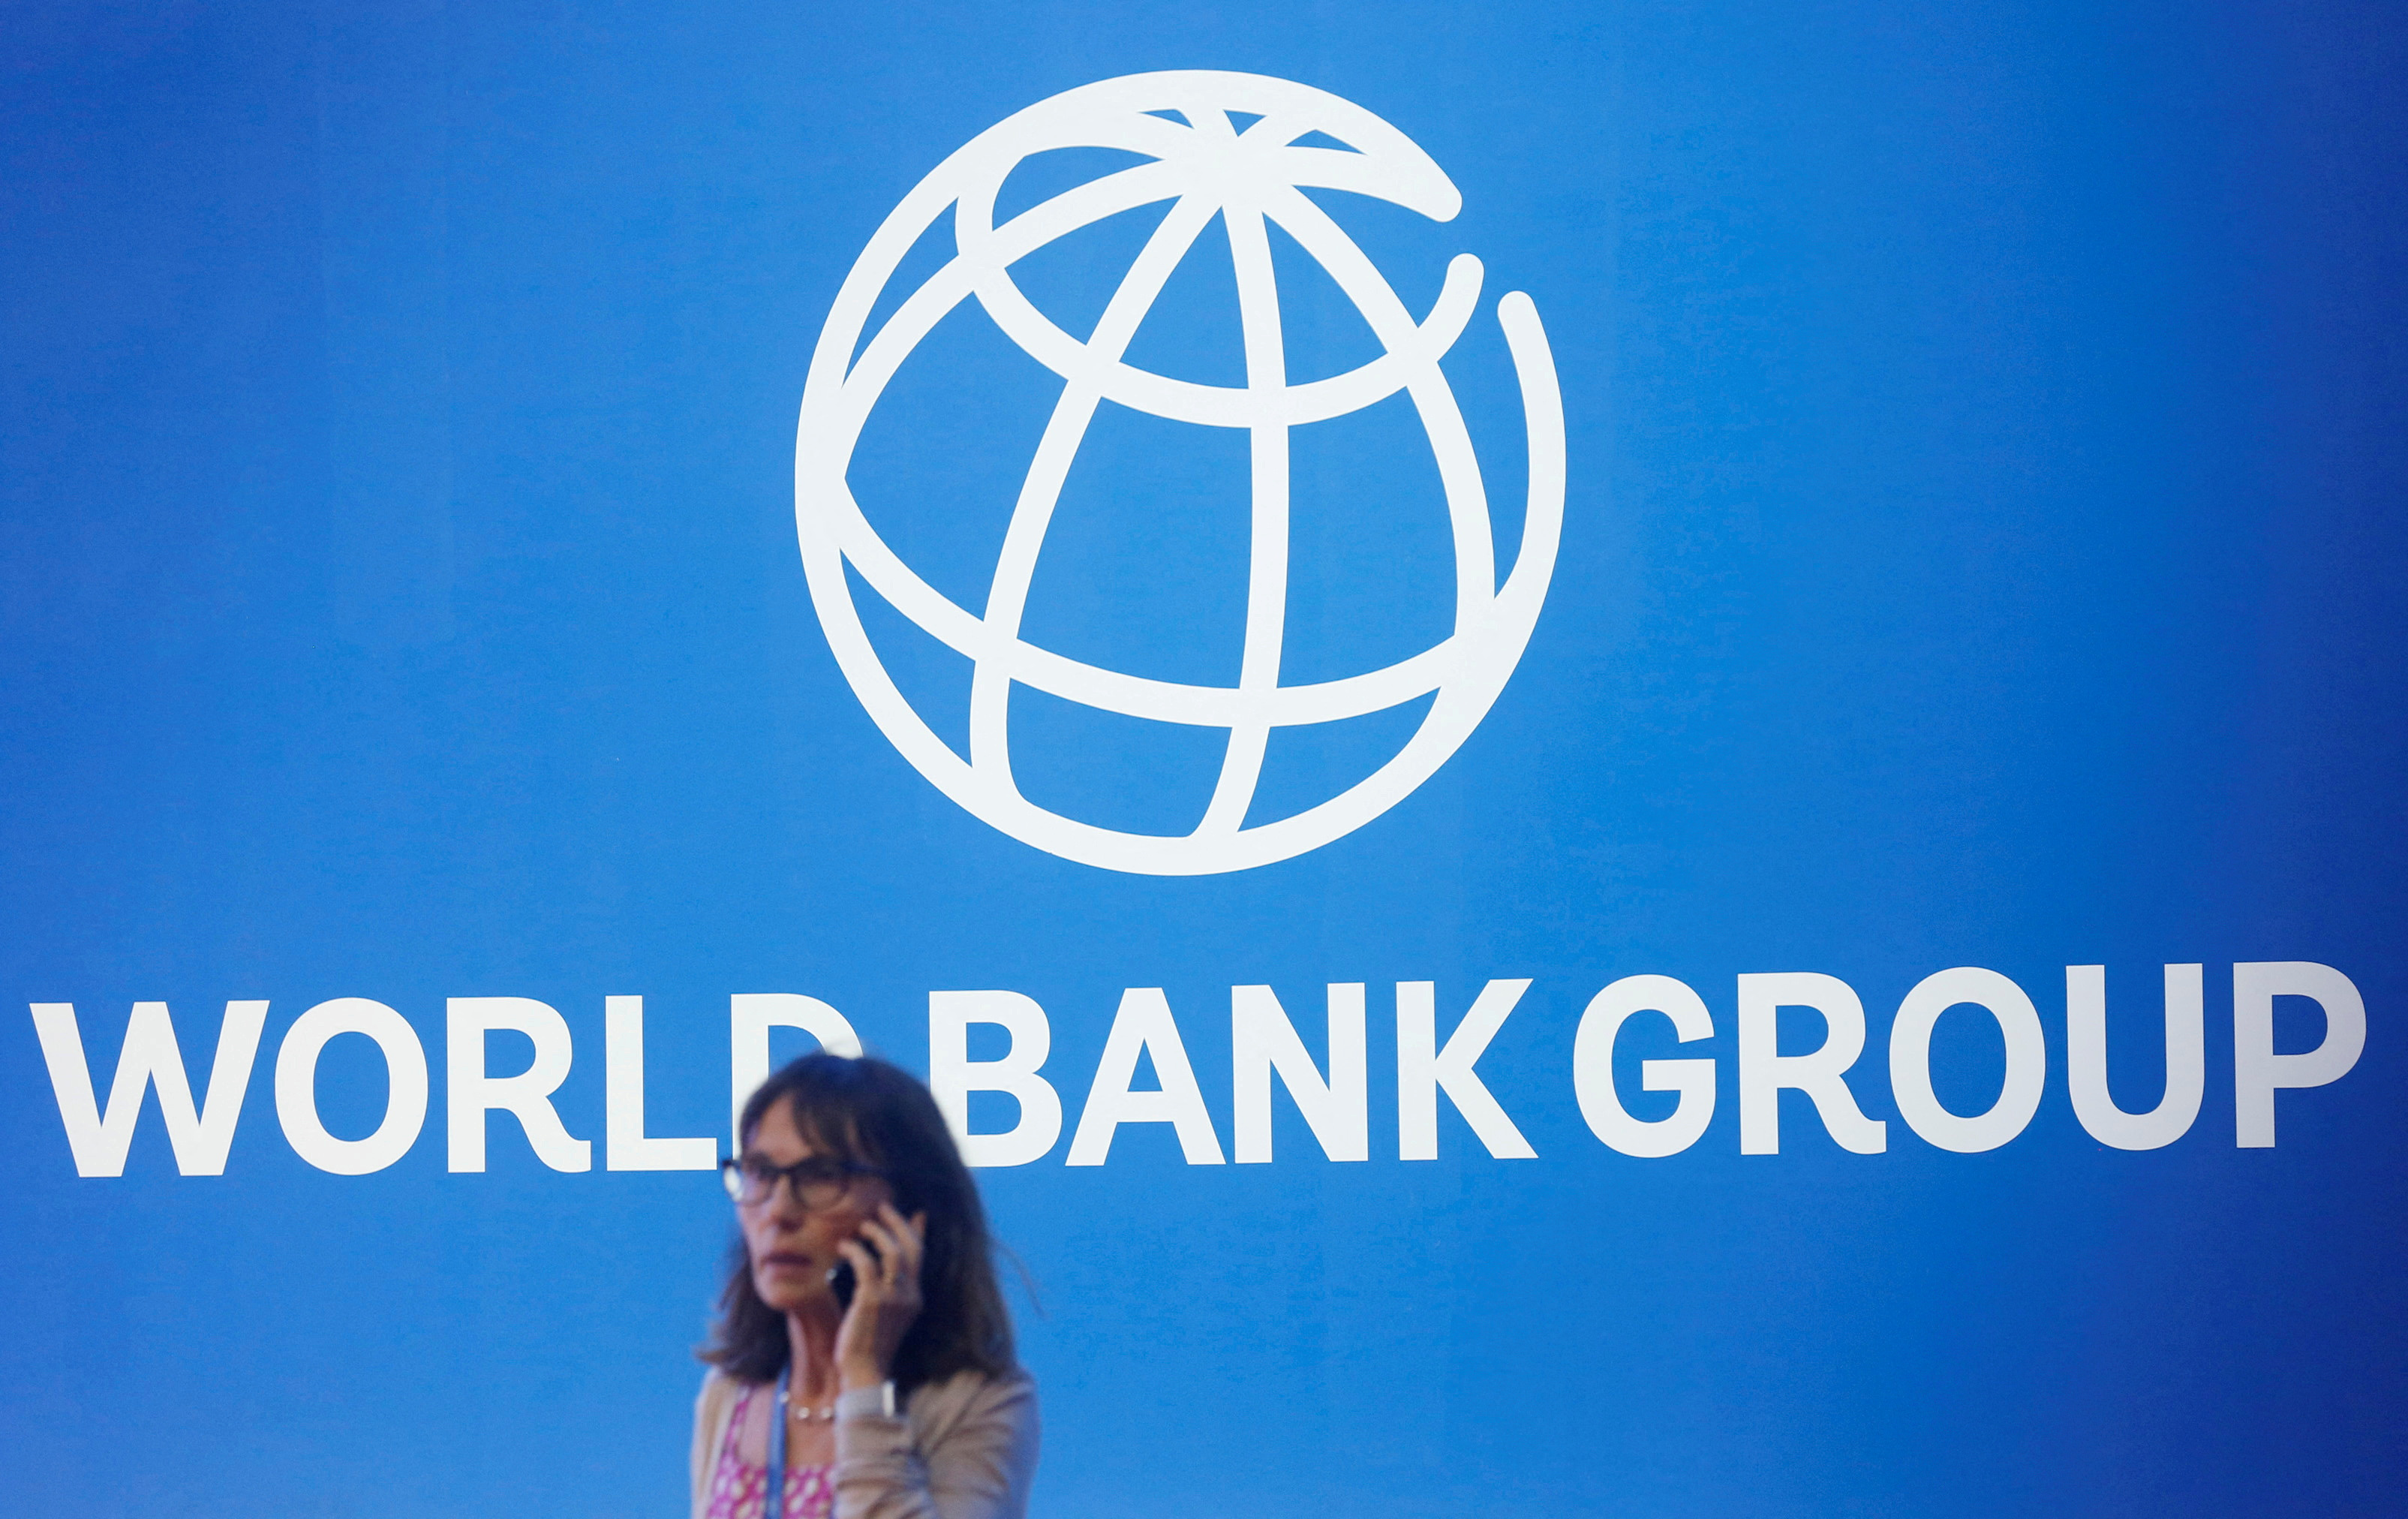 FILE PHOTO: A participant stands near a logo of World Bank at the International Monetary Fund - World Bank Annual Meeting 2018 in Nusa Dua